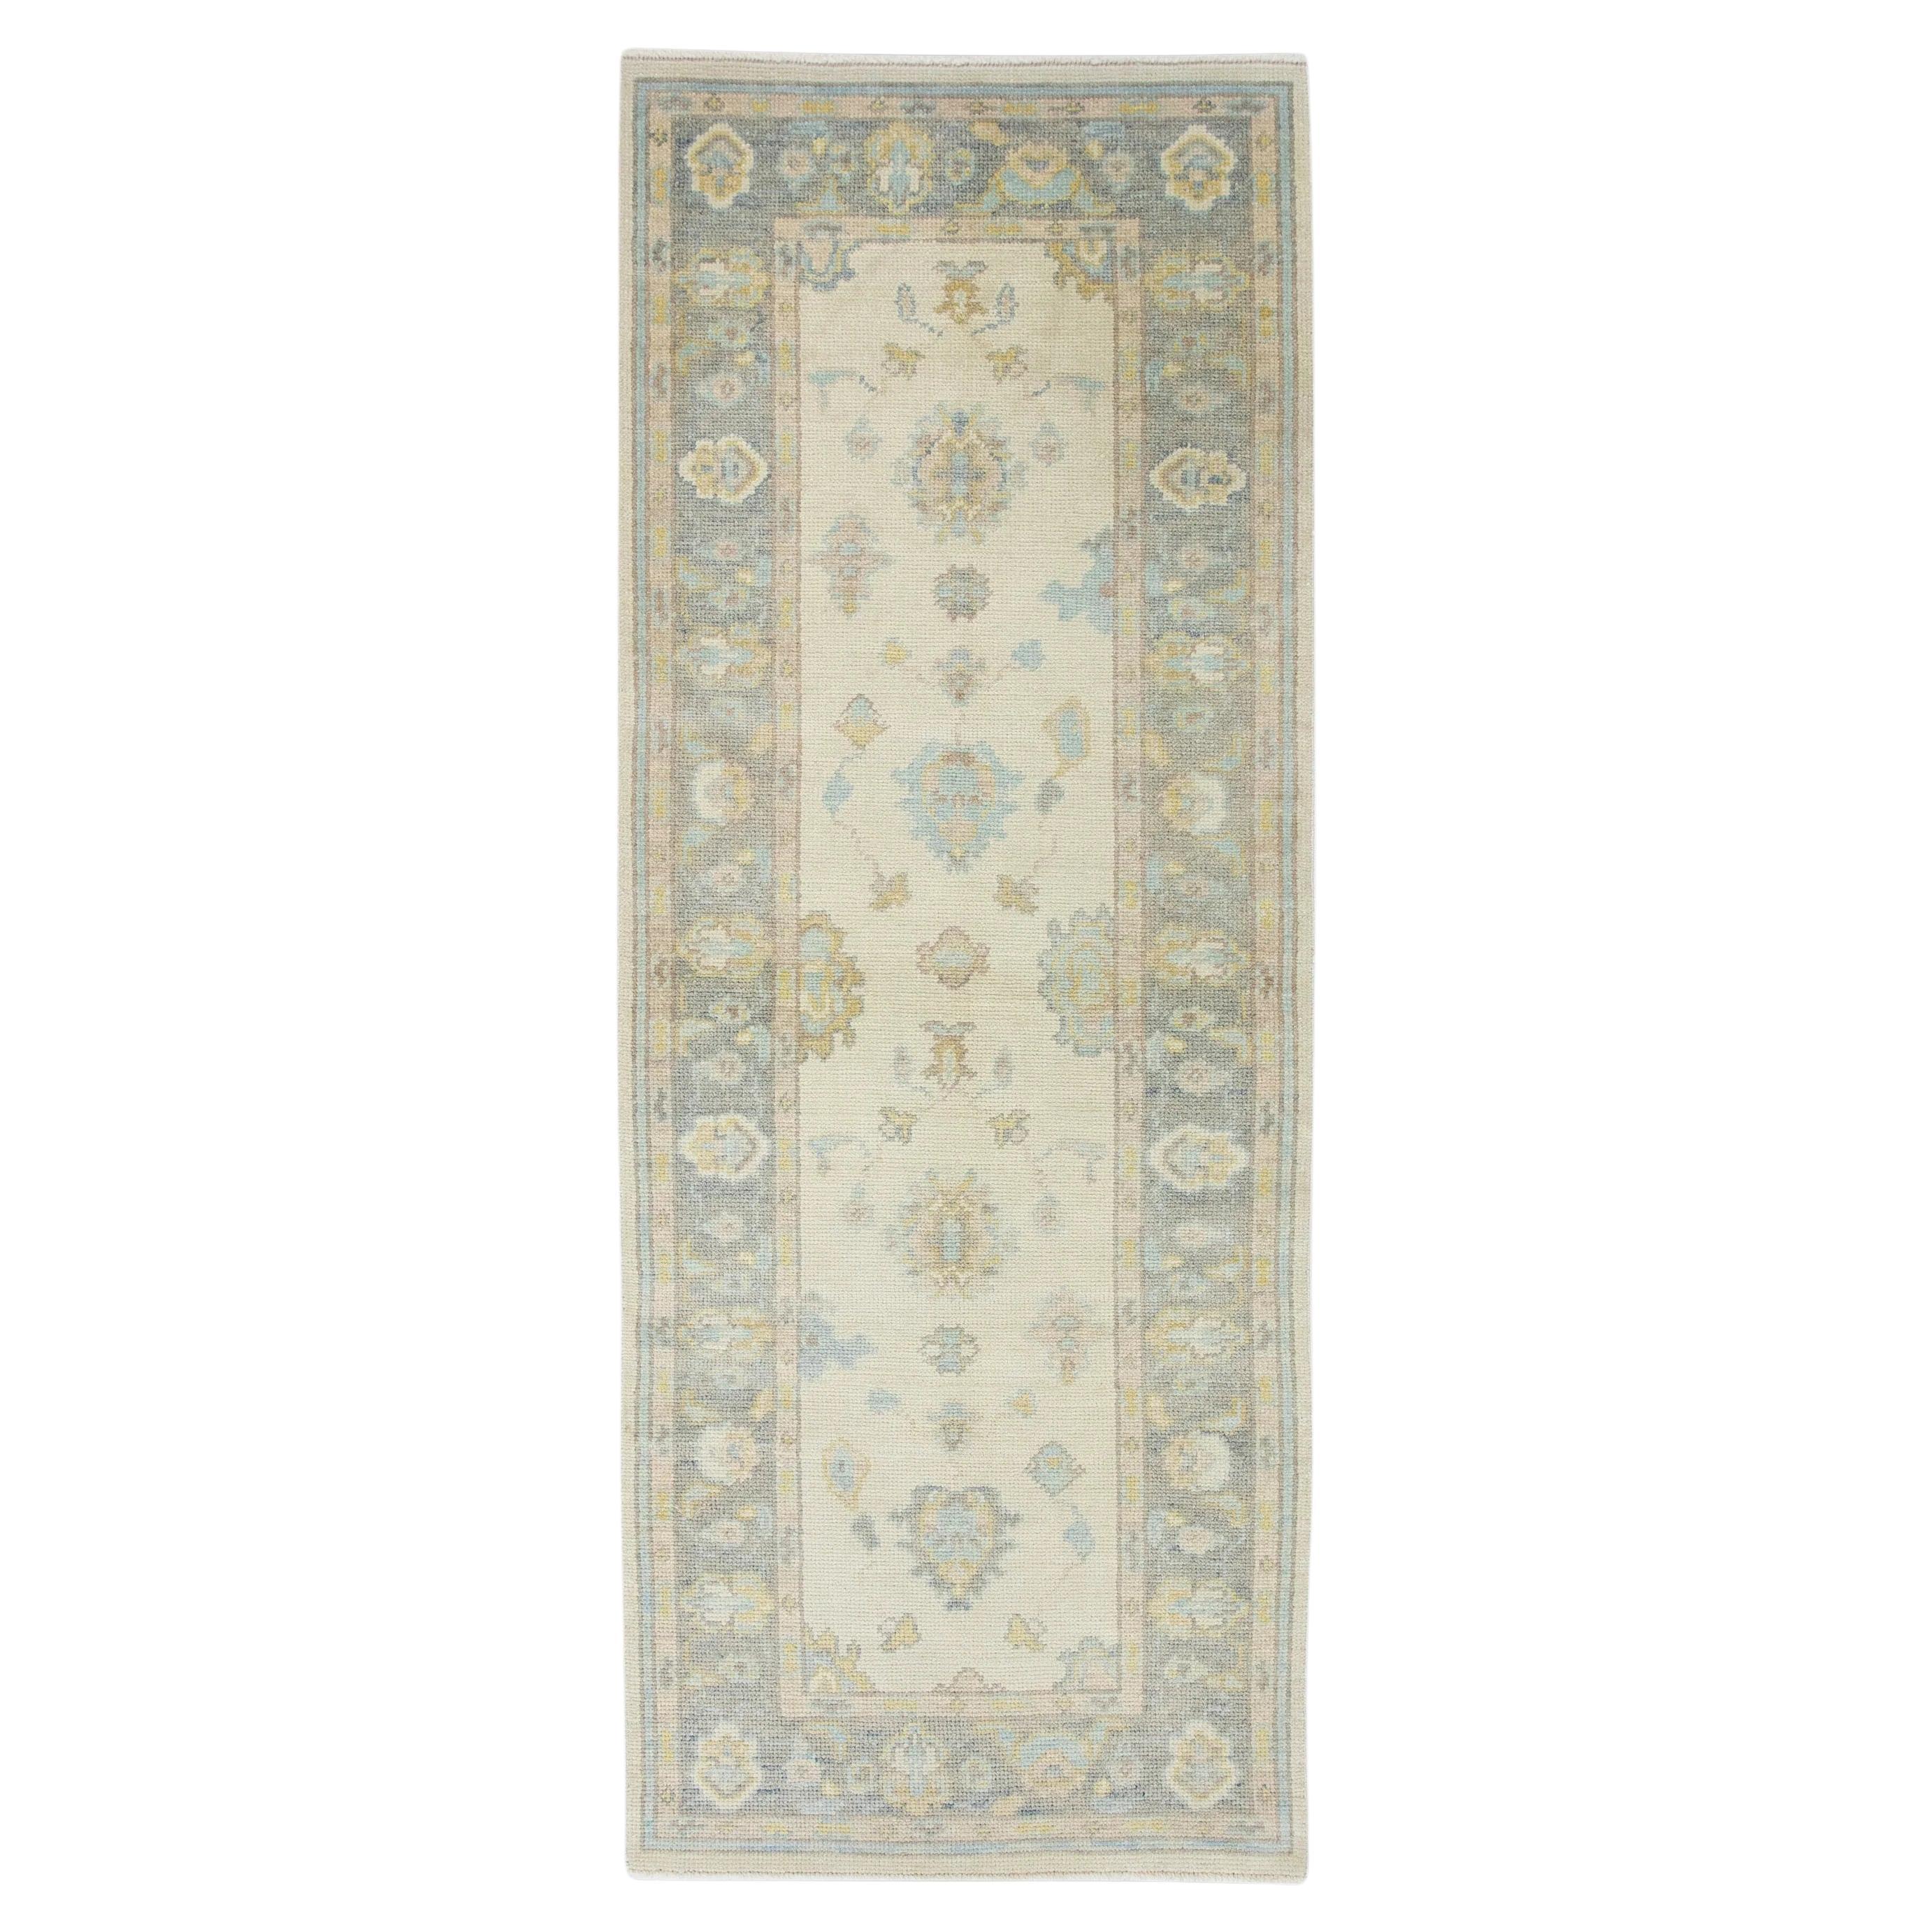 Blue and Yellow Handwoven Wool Floral Design Turkish Oushak Rug 3' x 7'10" For Sale